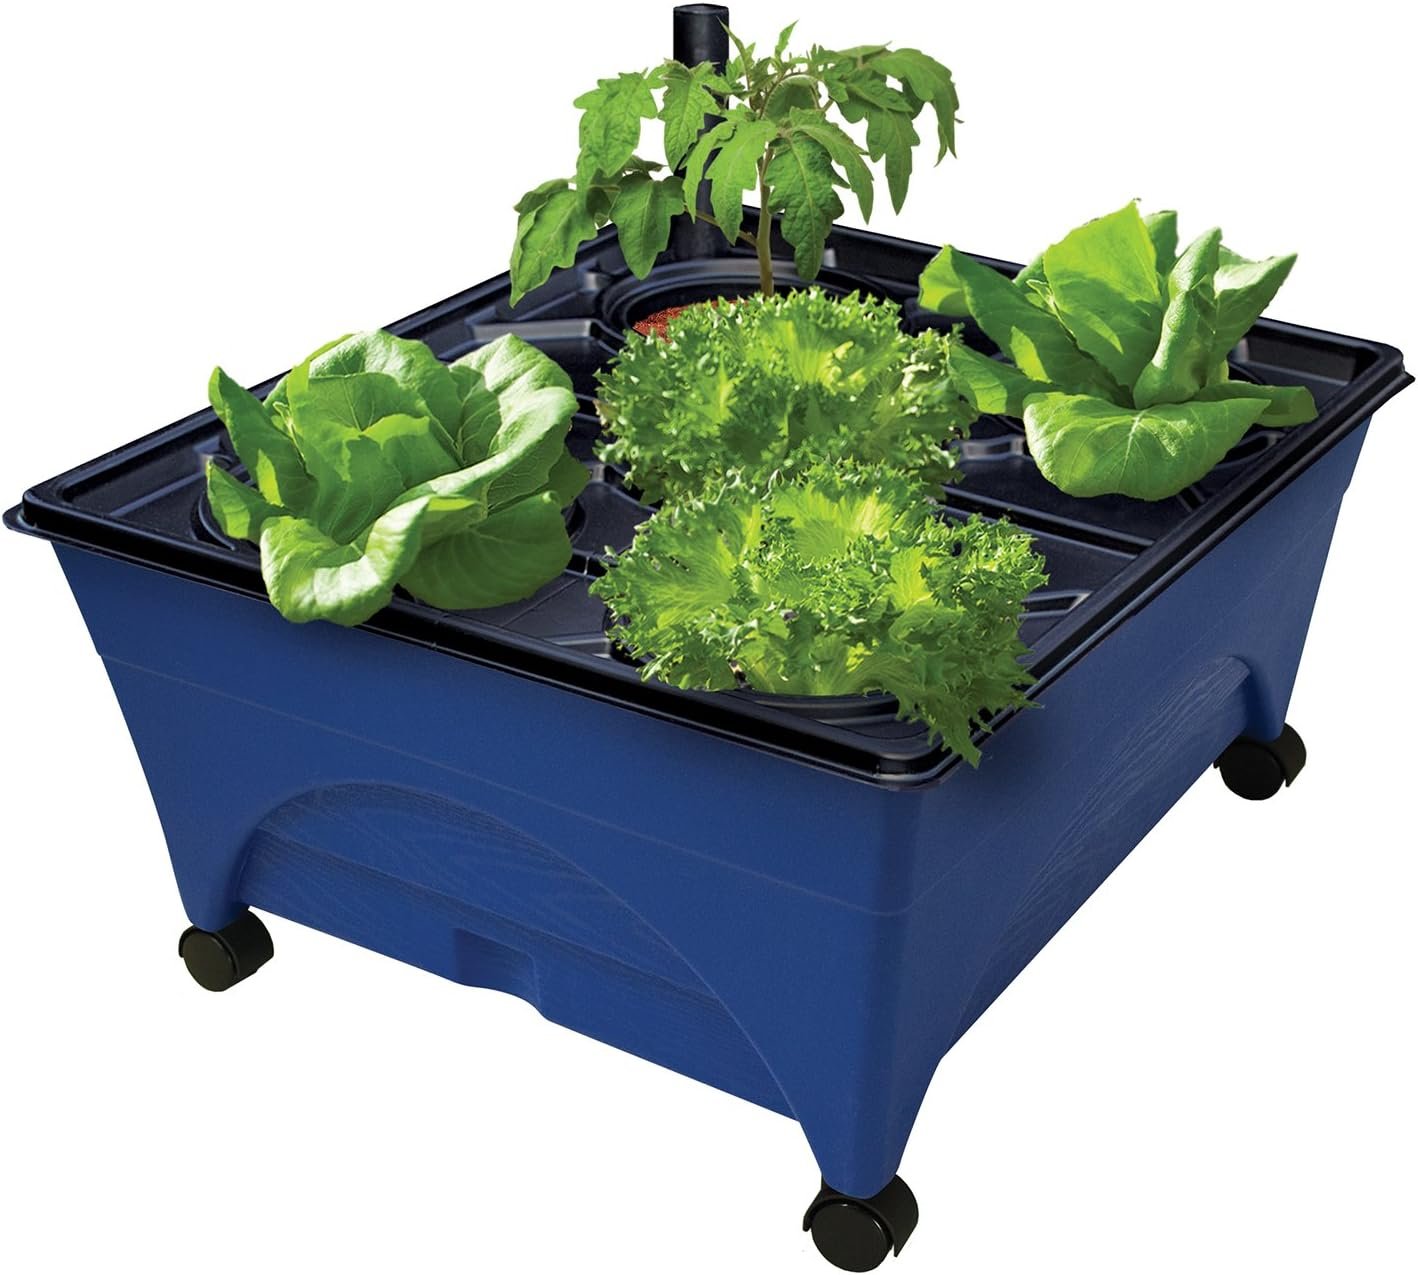 Emsco Group 2370 Hydropickers Compact 24” x 20” Footprint – Mobility Provided by Casters Non-Electric Hydroponics Grow Box, Cobalt Blue